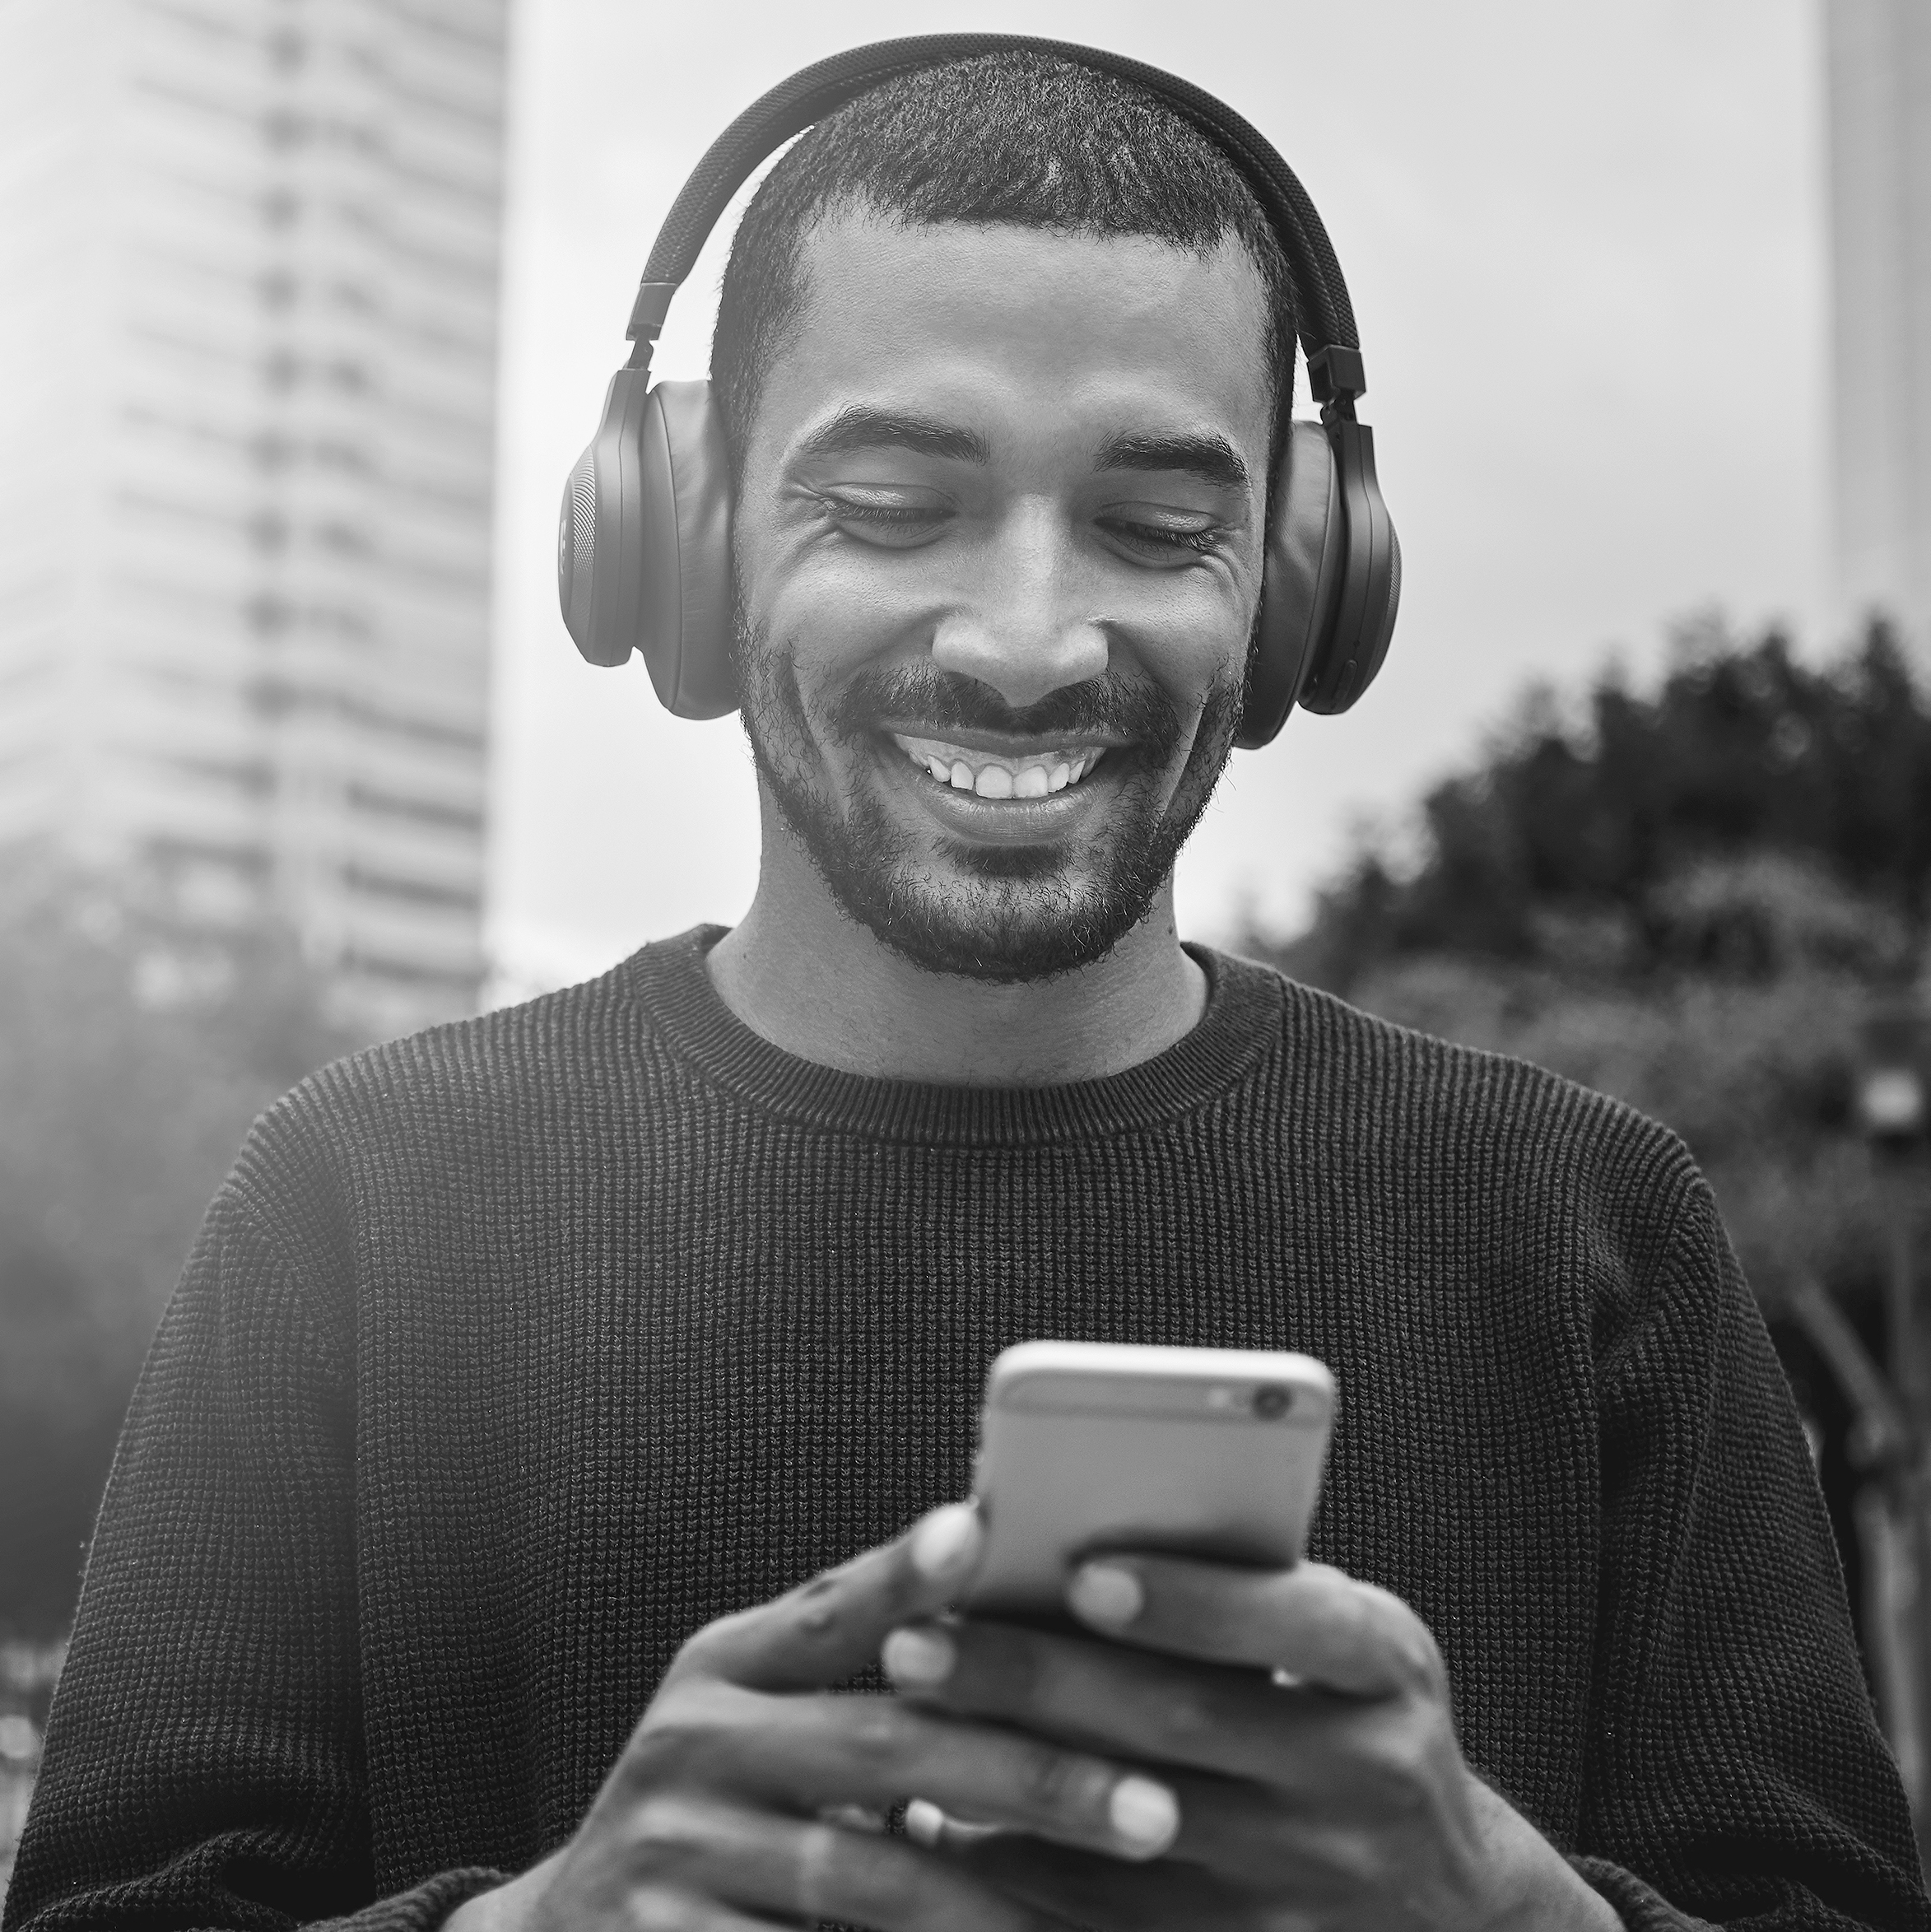 Young,Man,Looking,At,Smartphone,With,Headphone,On,His,Head